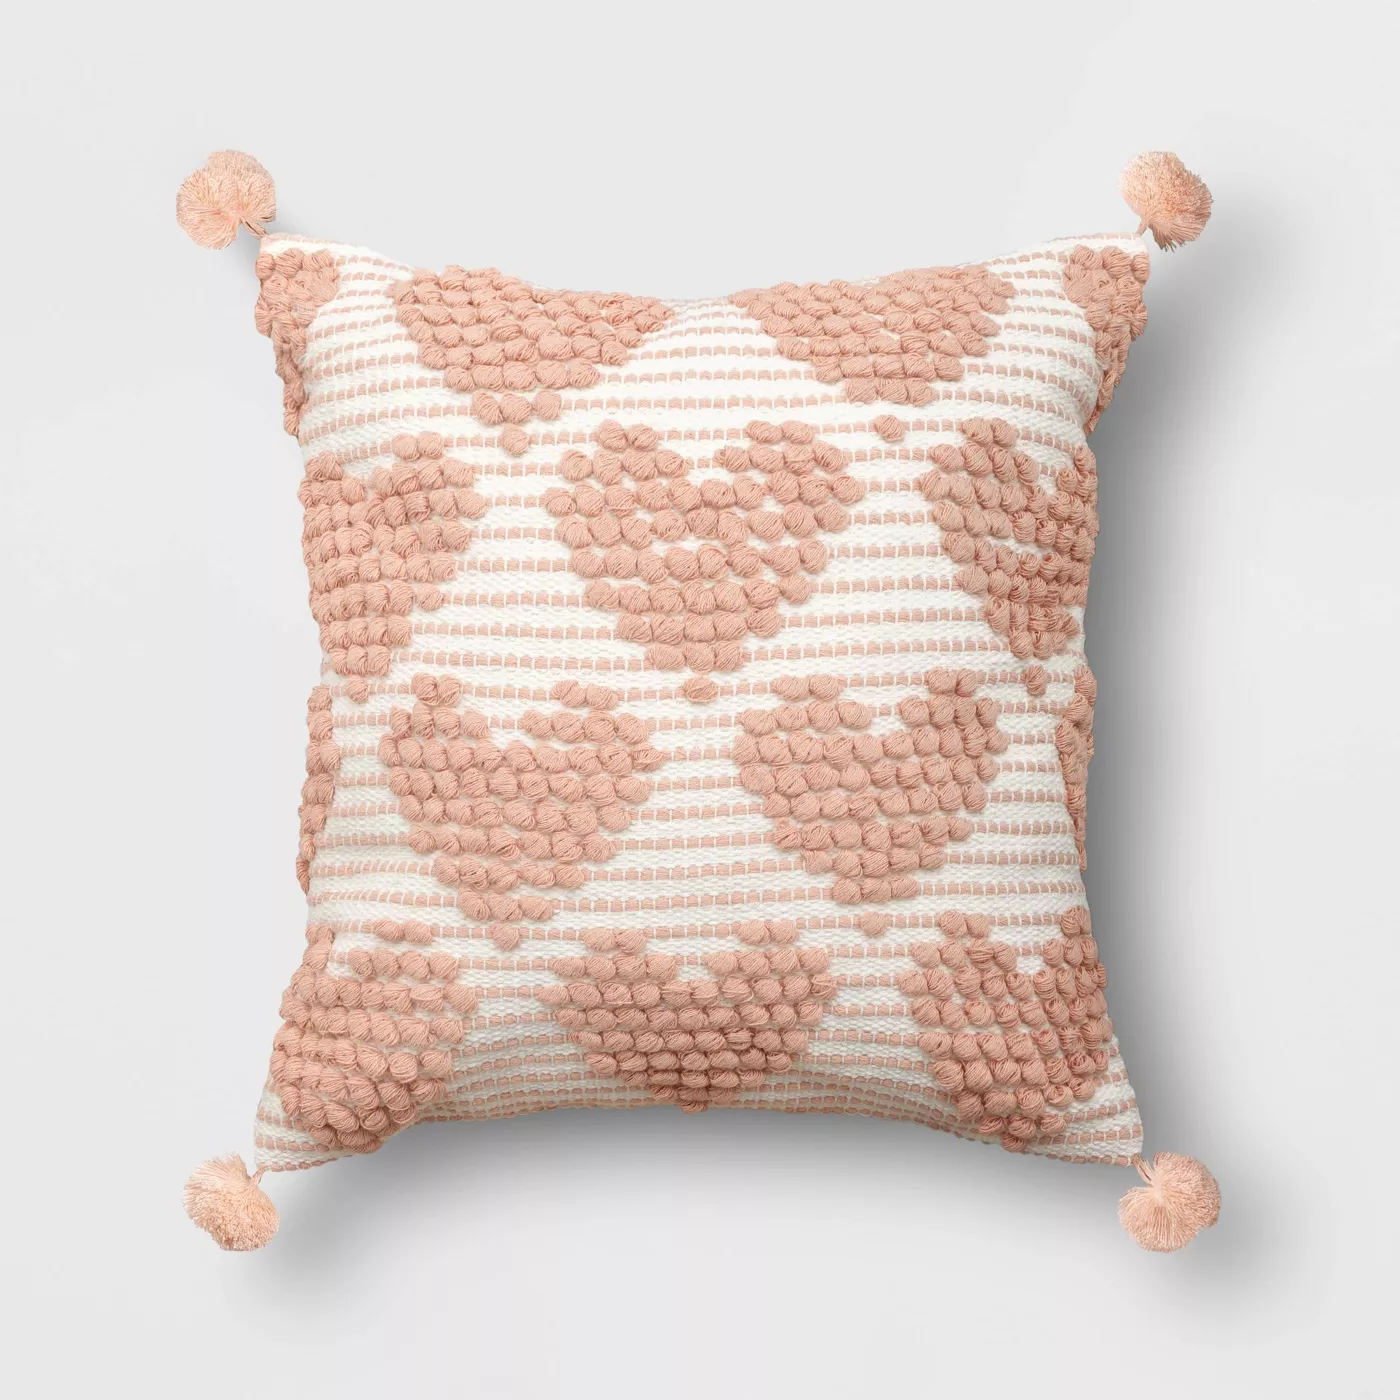 Square Valentine’s Day Hearts Pillow Cream/Blush - Opalhouse™ - image 1 of 8